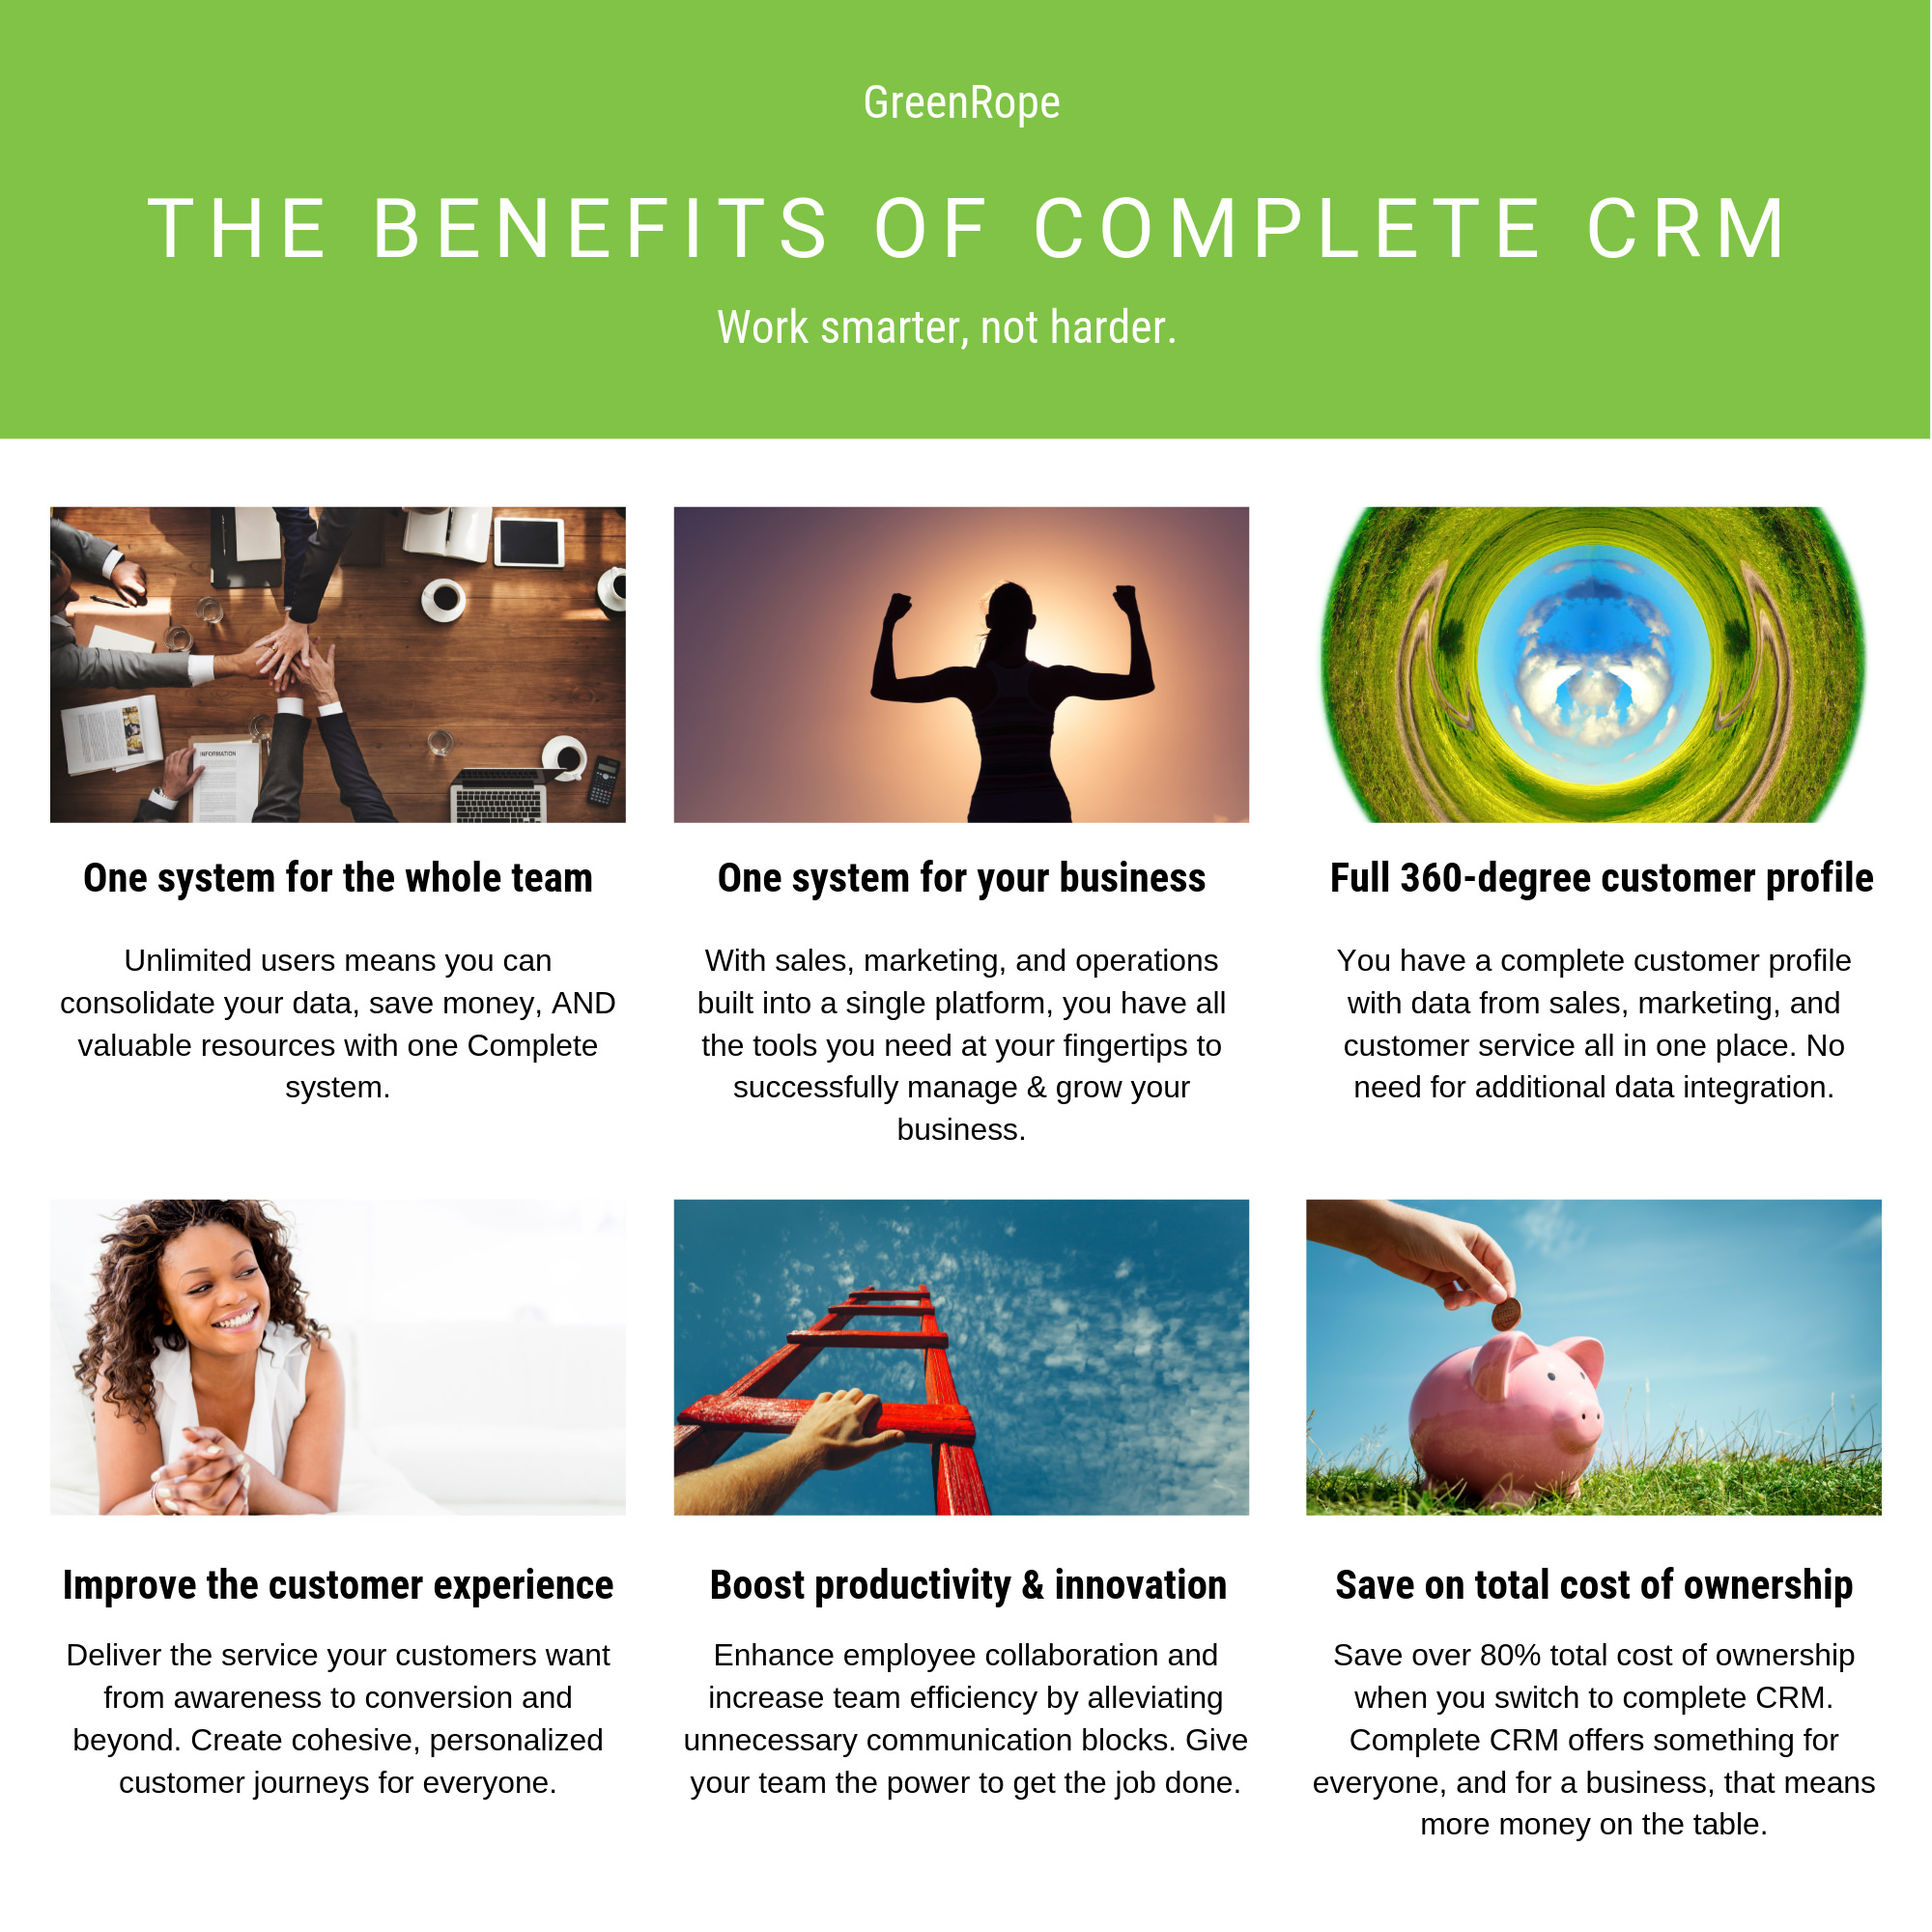 Complete CRM